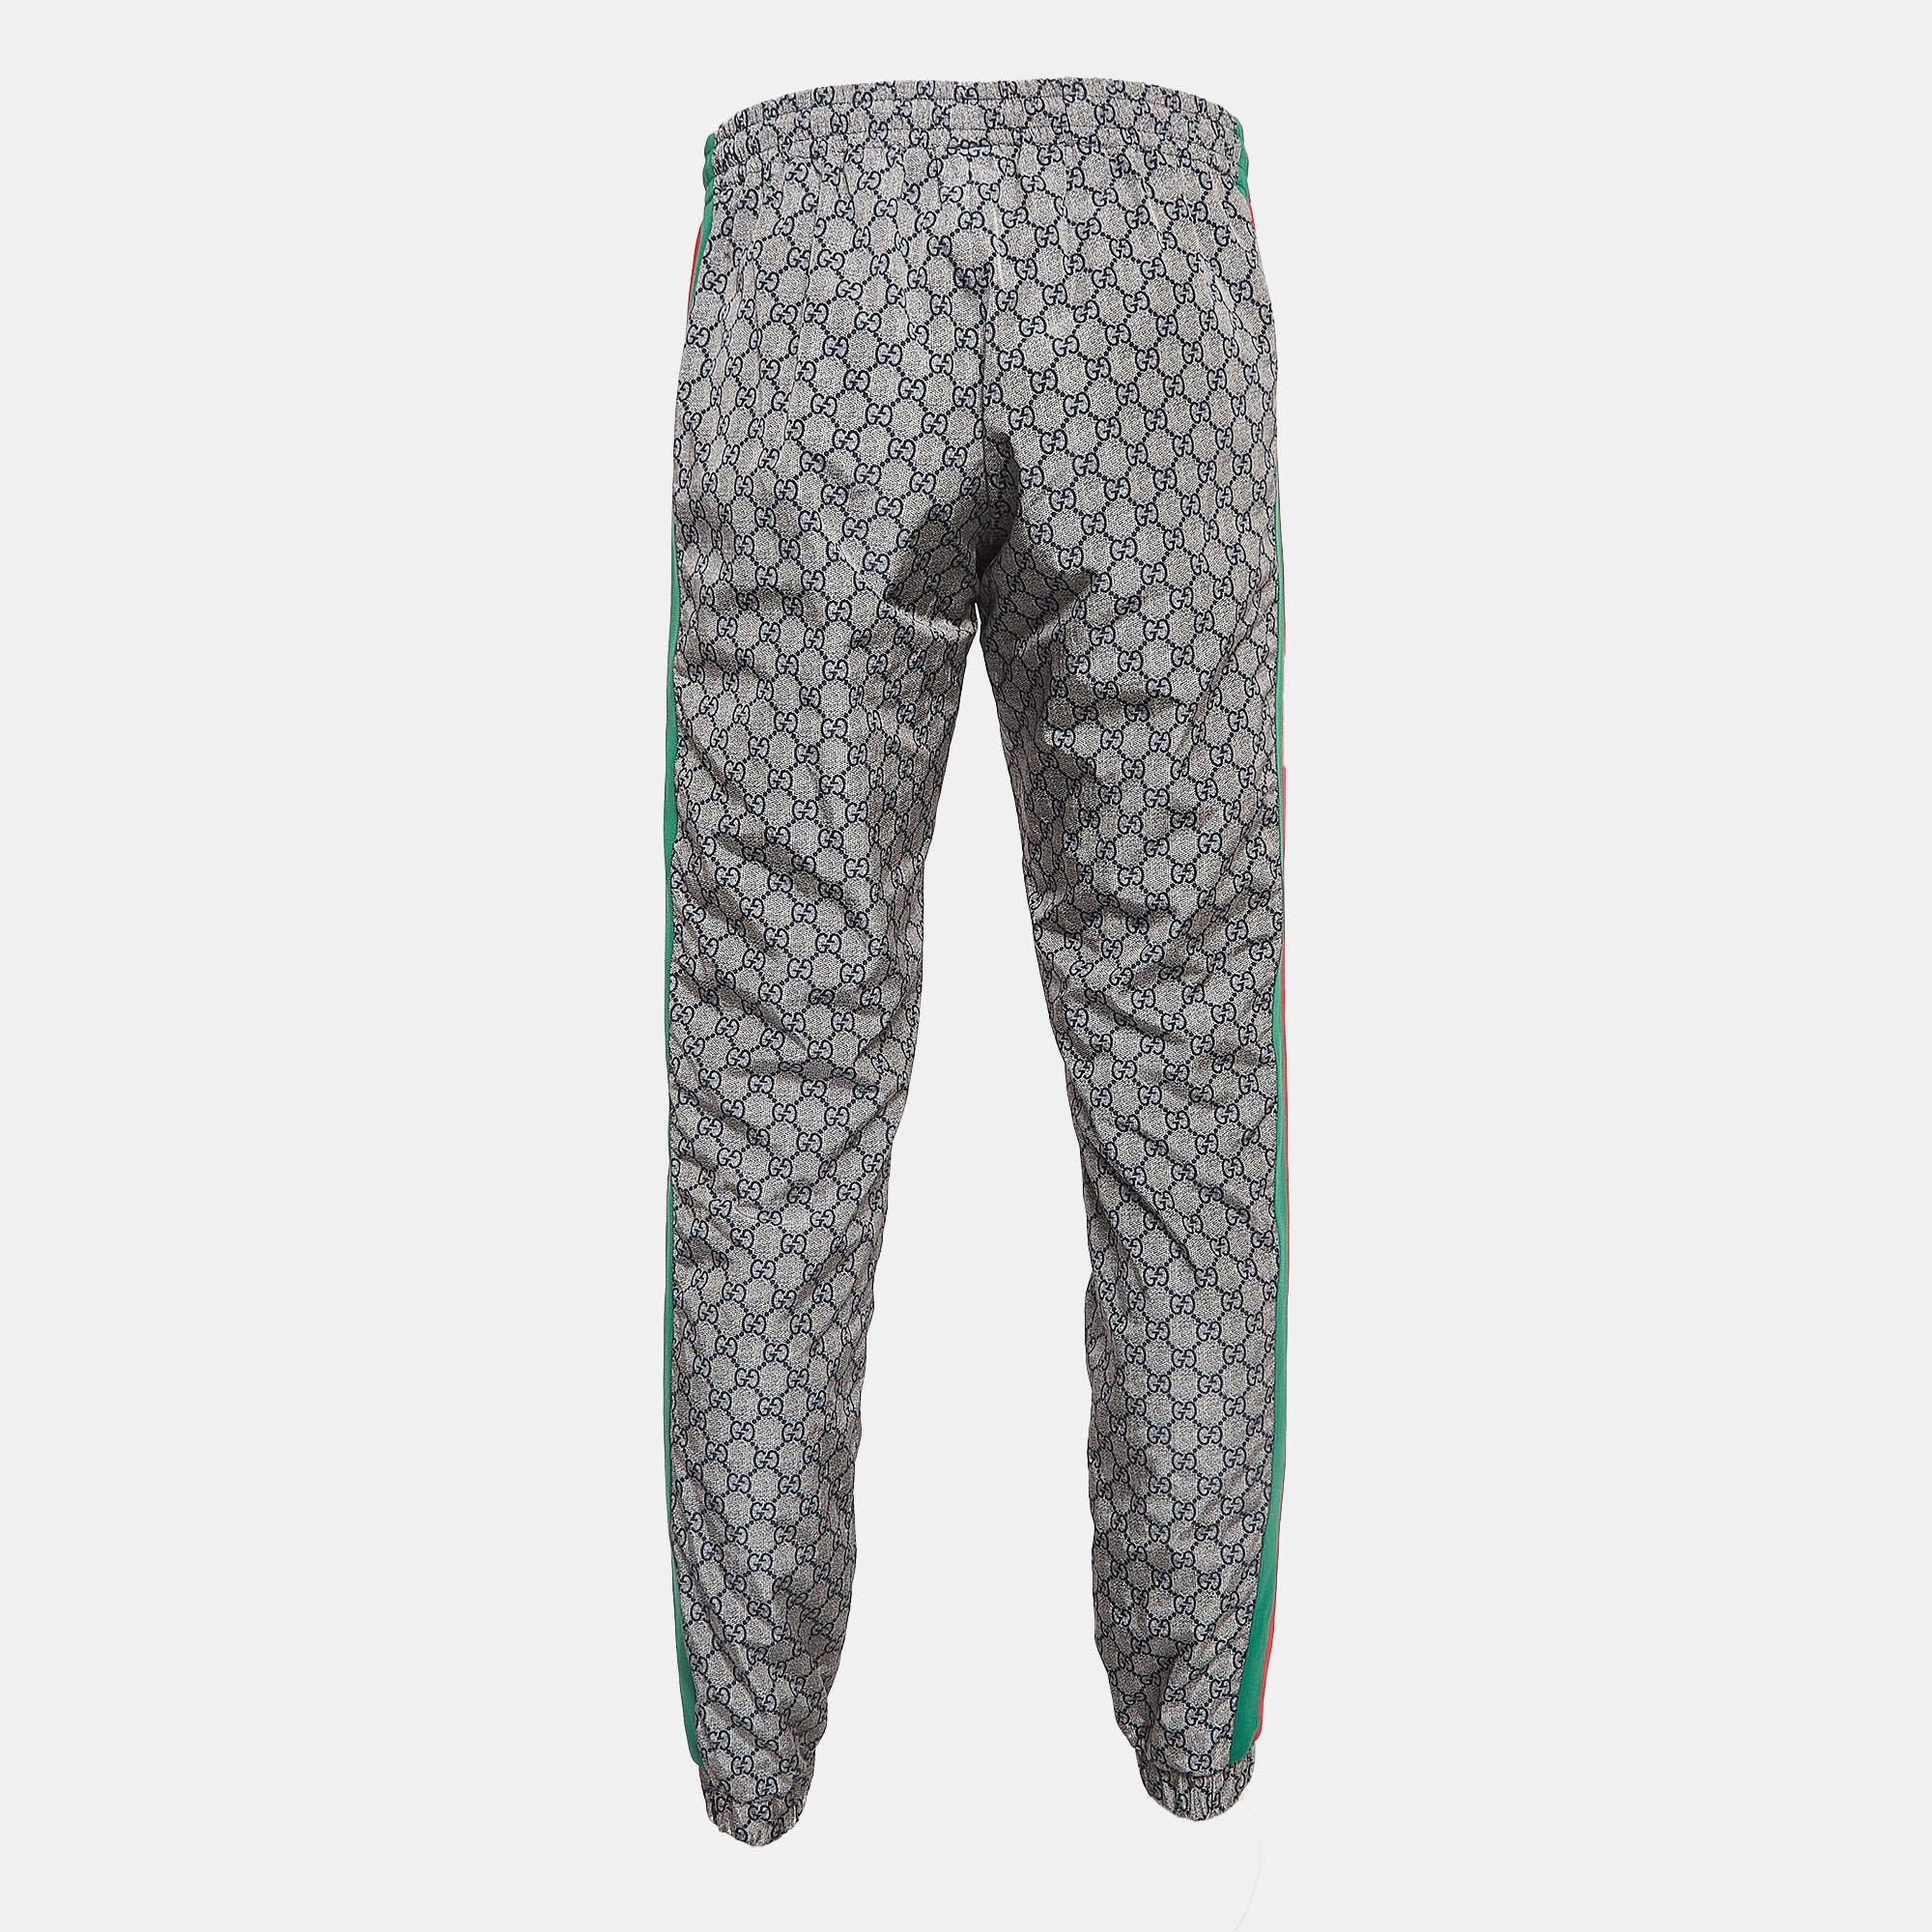 Step out for a jog with these super-stylish joggers, lounge around, or go out to run errands, the creation will make you feel comfortable all day. It has been made using high-grade materials and will go well with sneakers, t-shirts, or sweatshirts